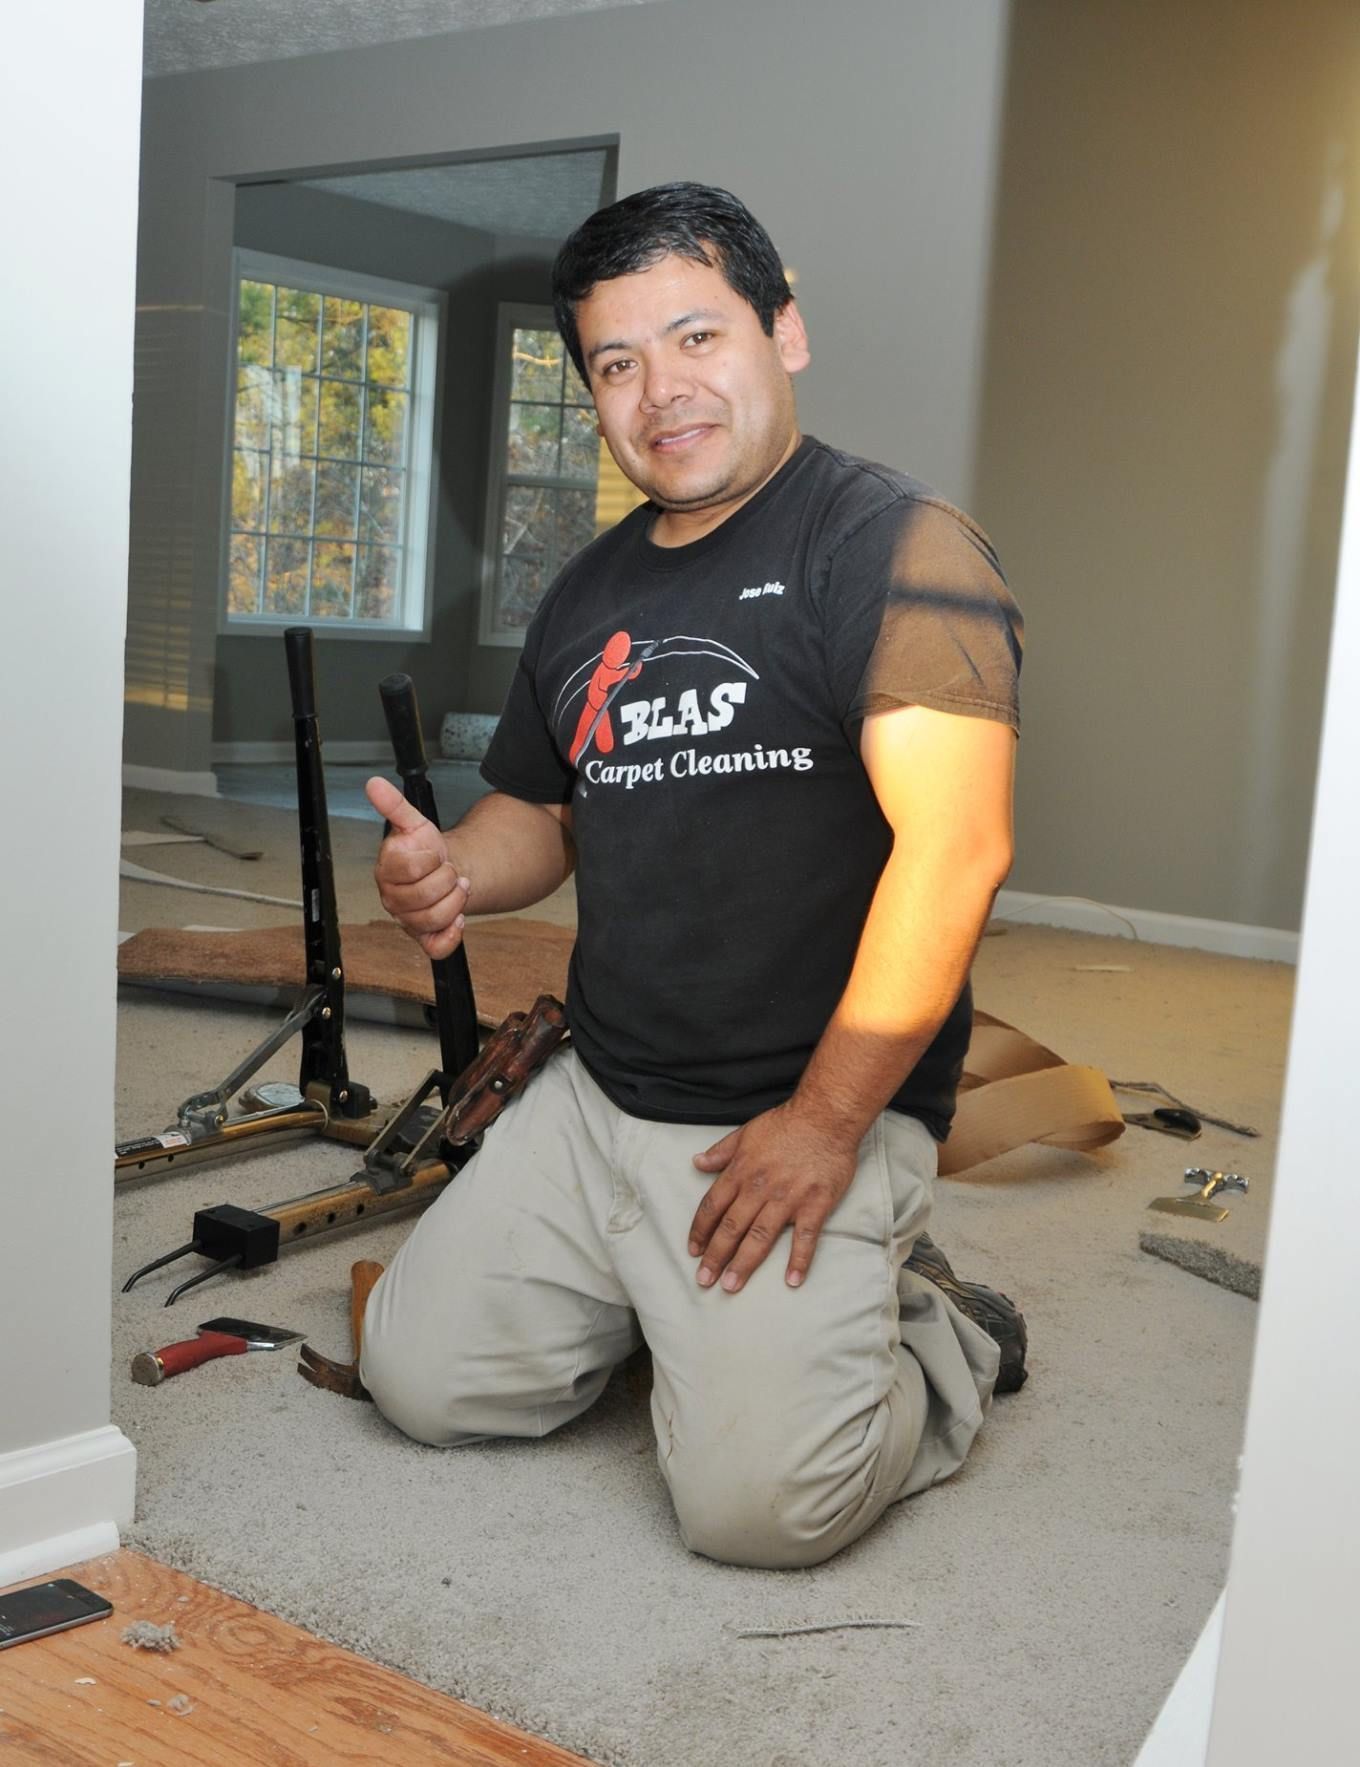 Professional carpet installation specialist removing old carpeting.